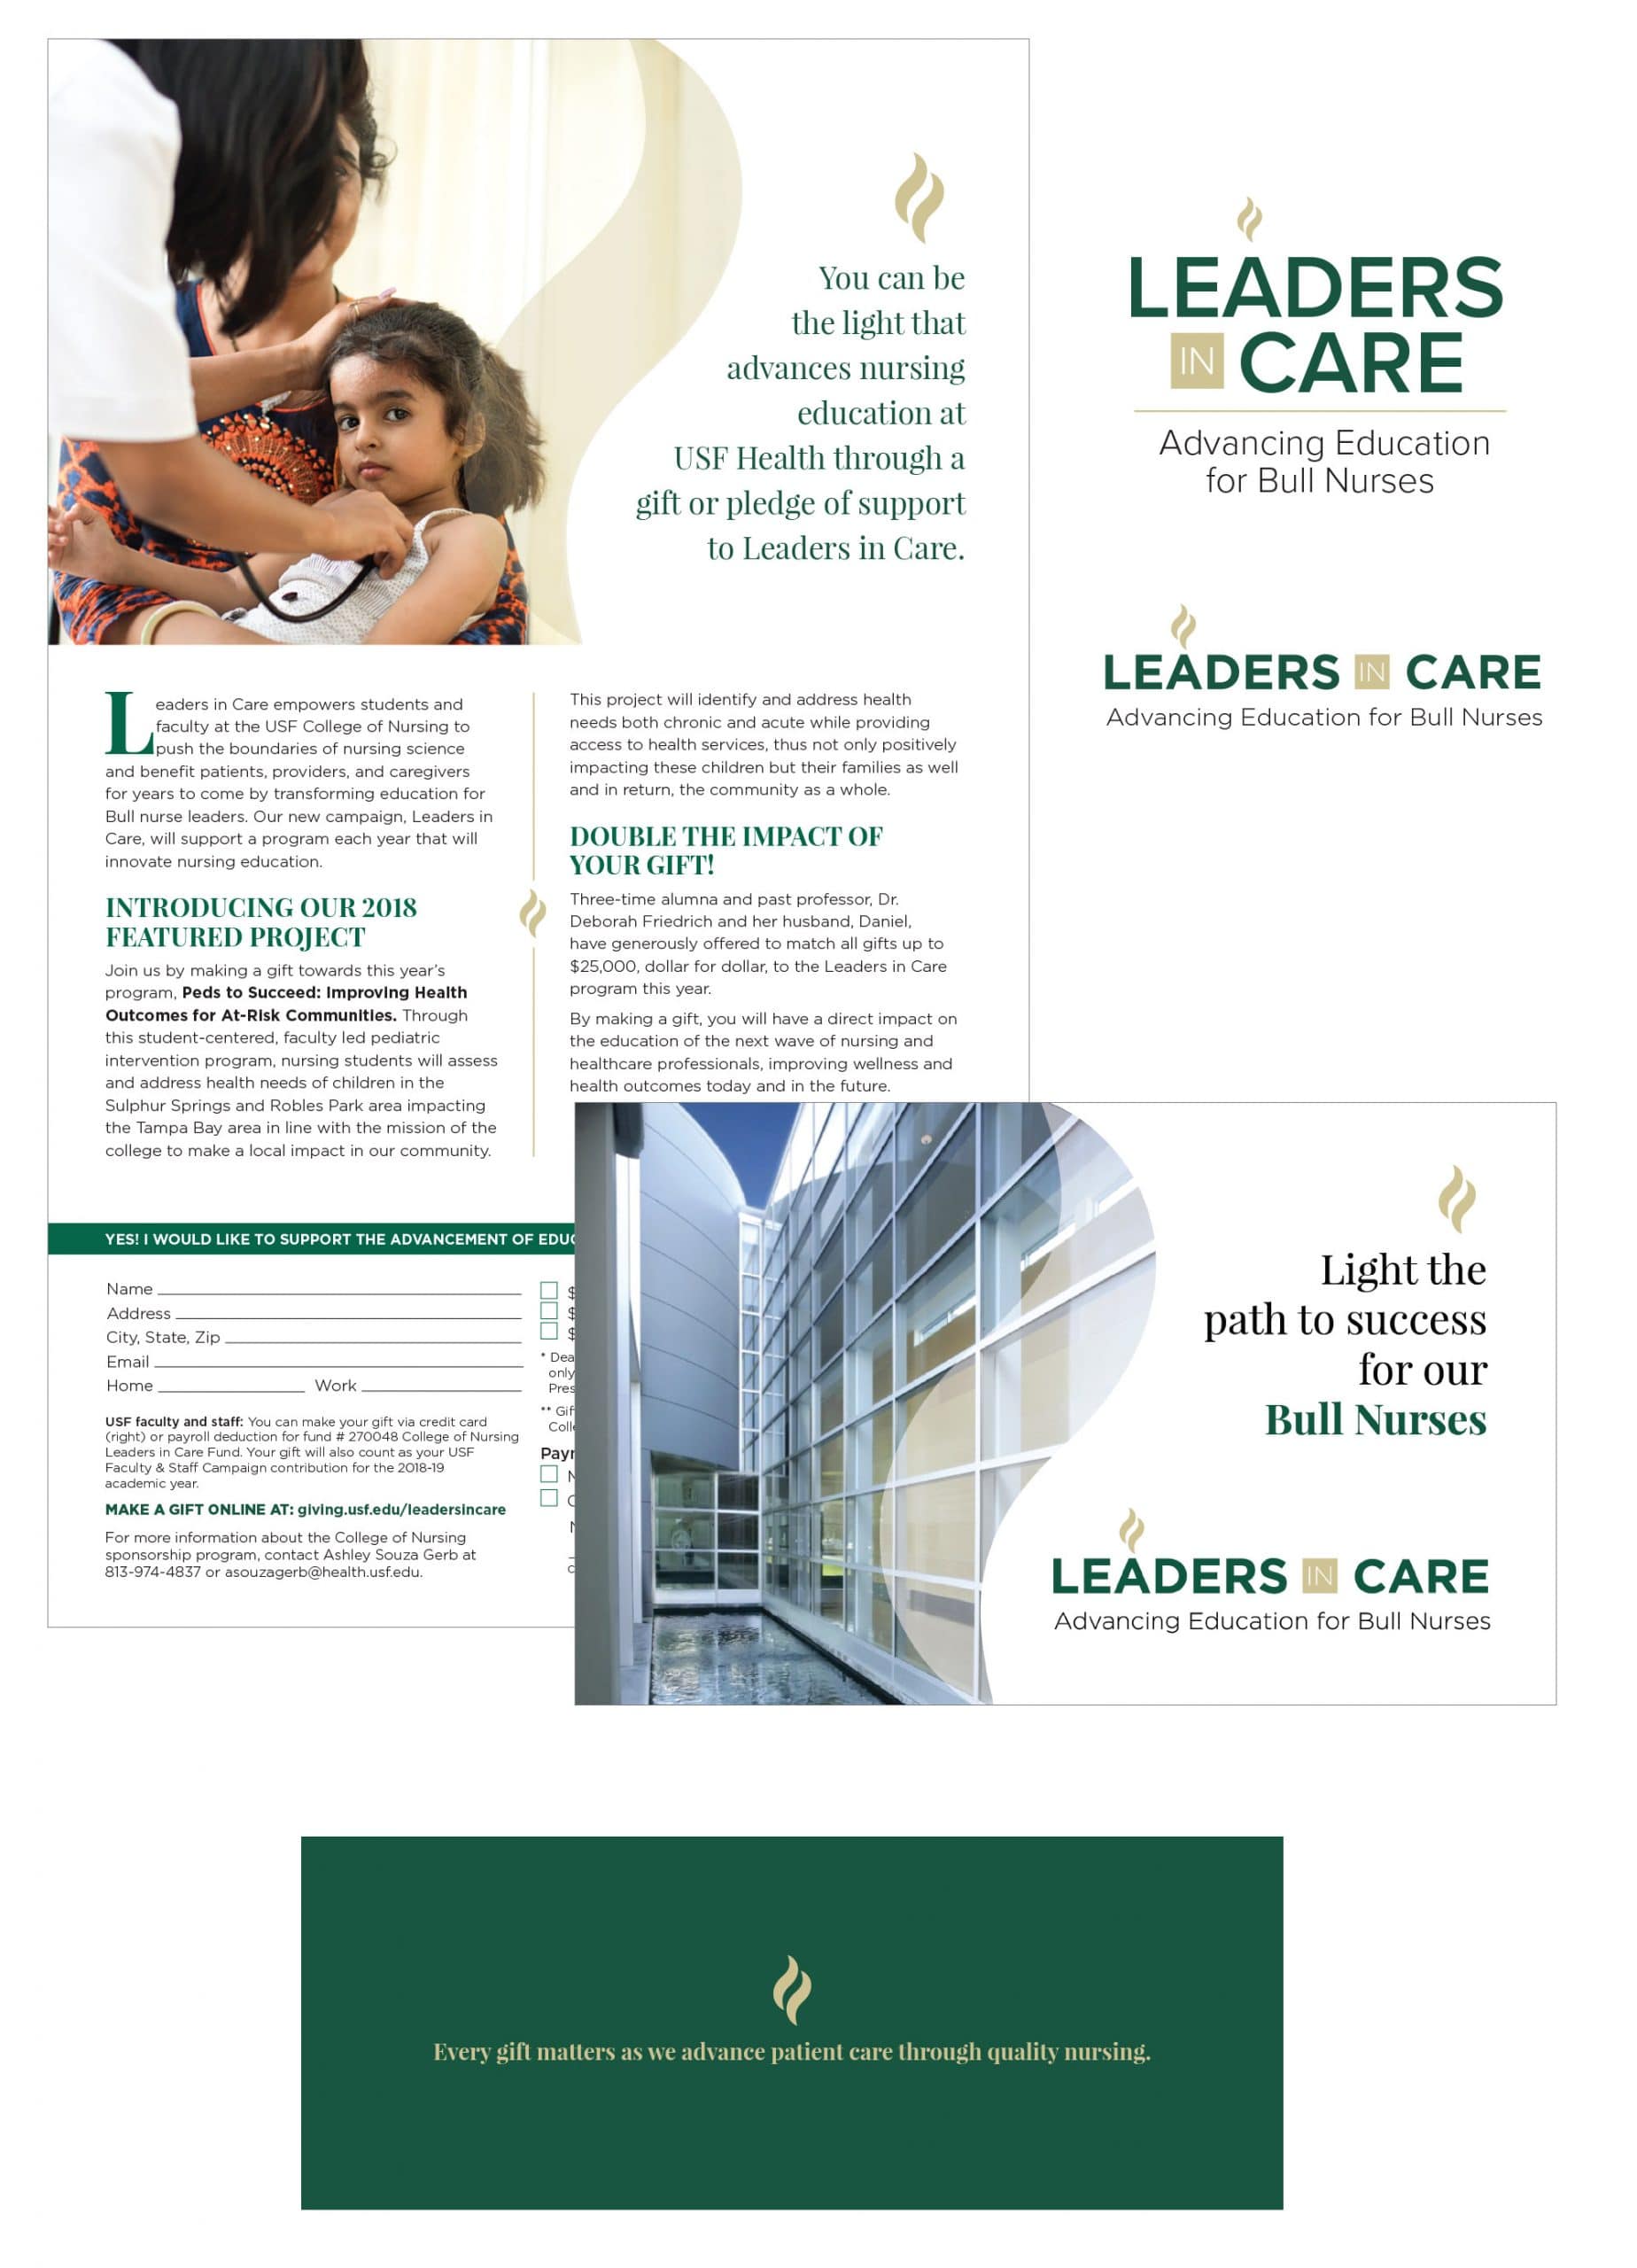 USF College of Nursing Leaders in Care campaign